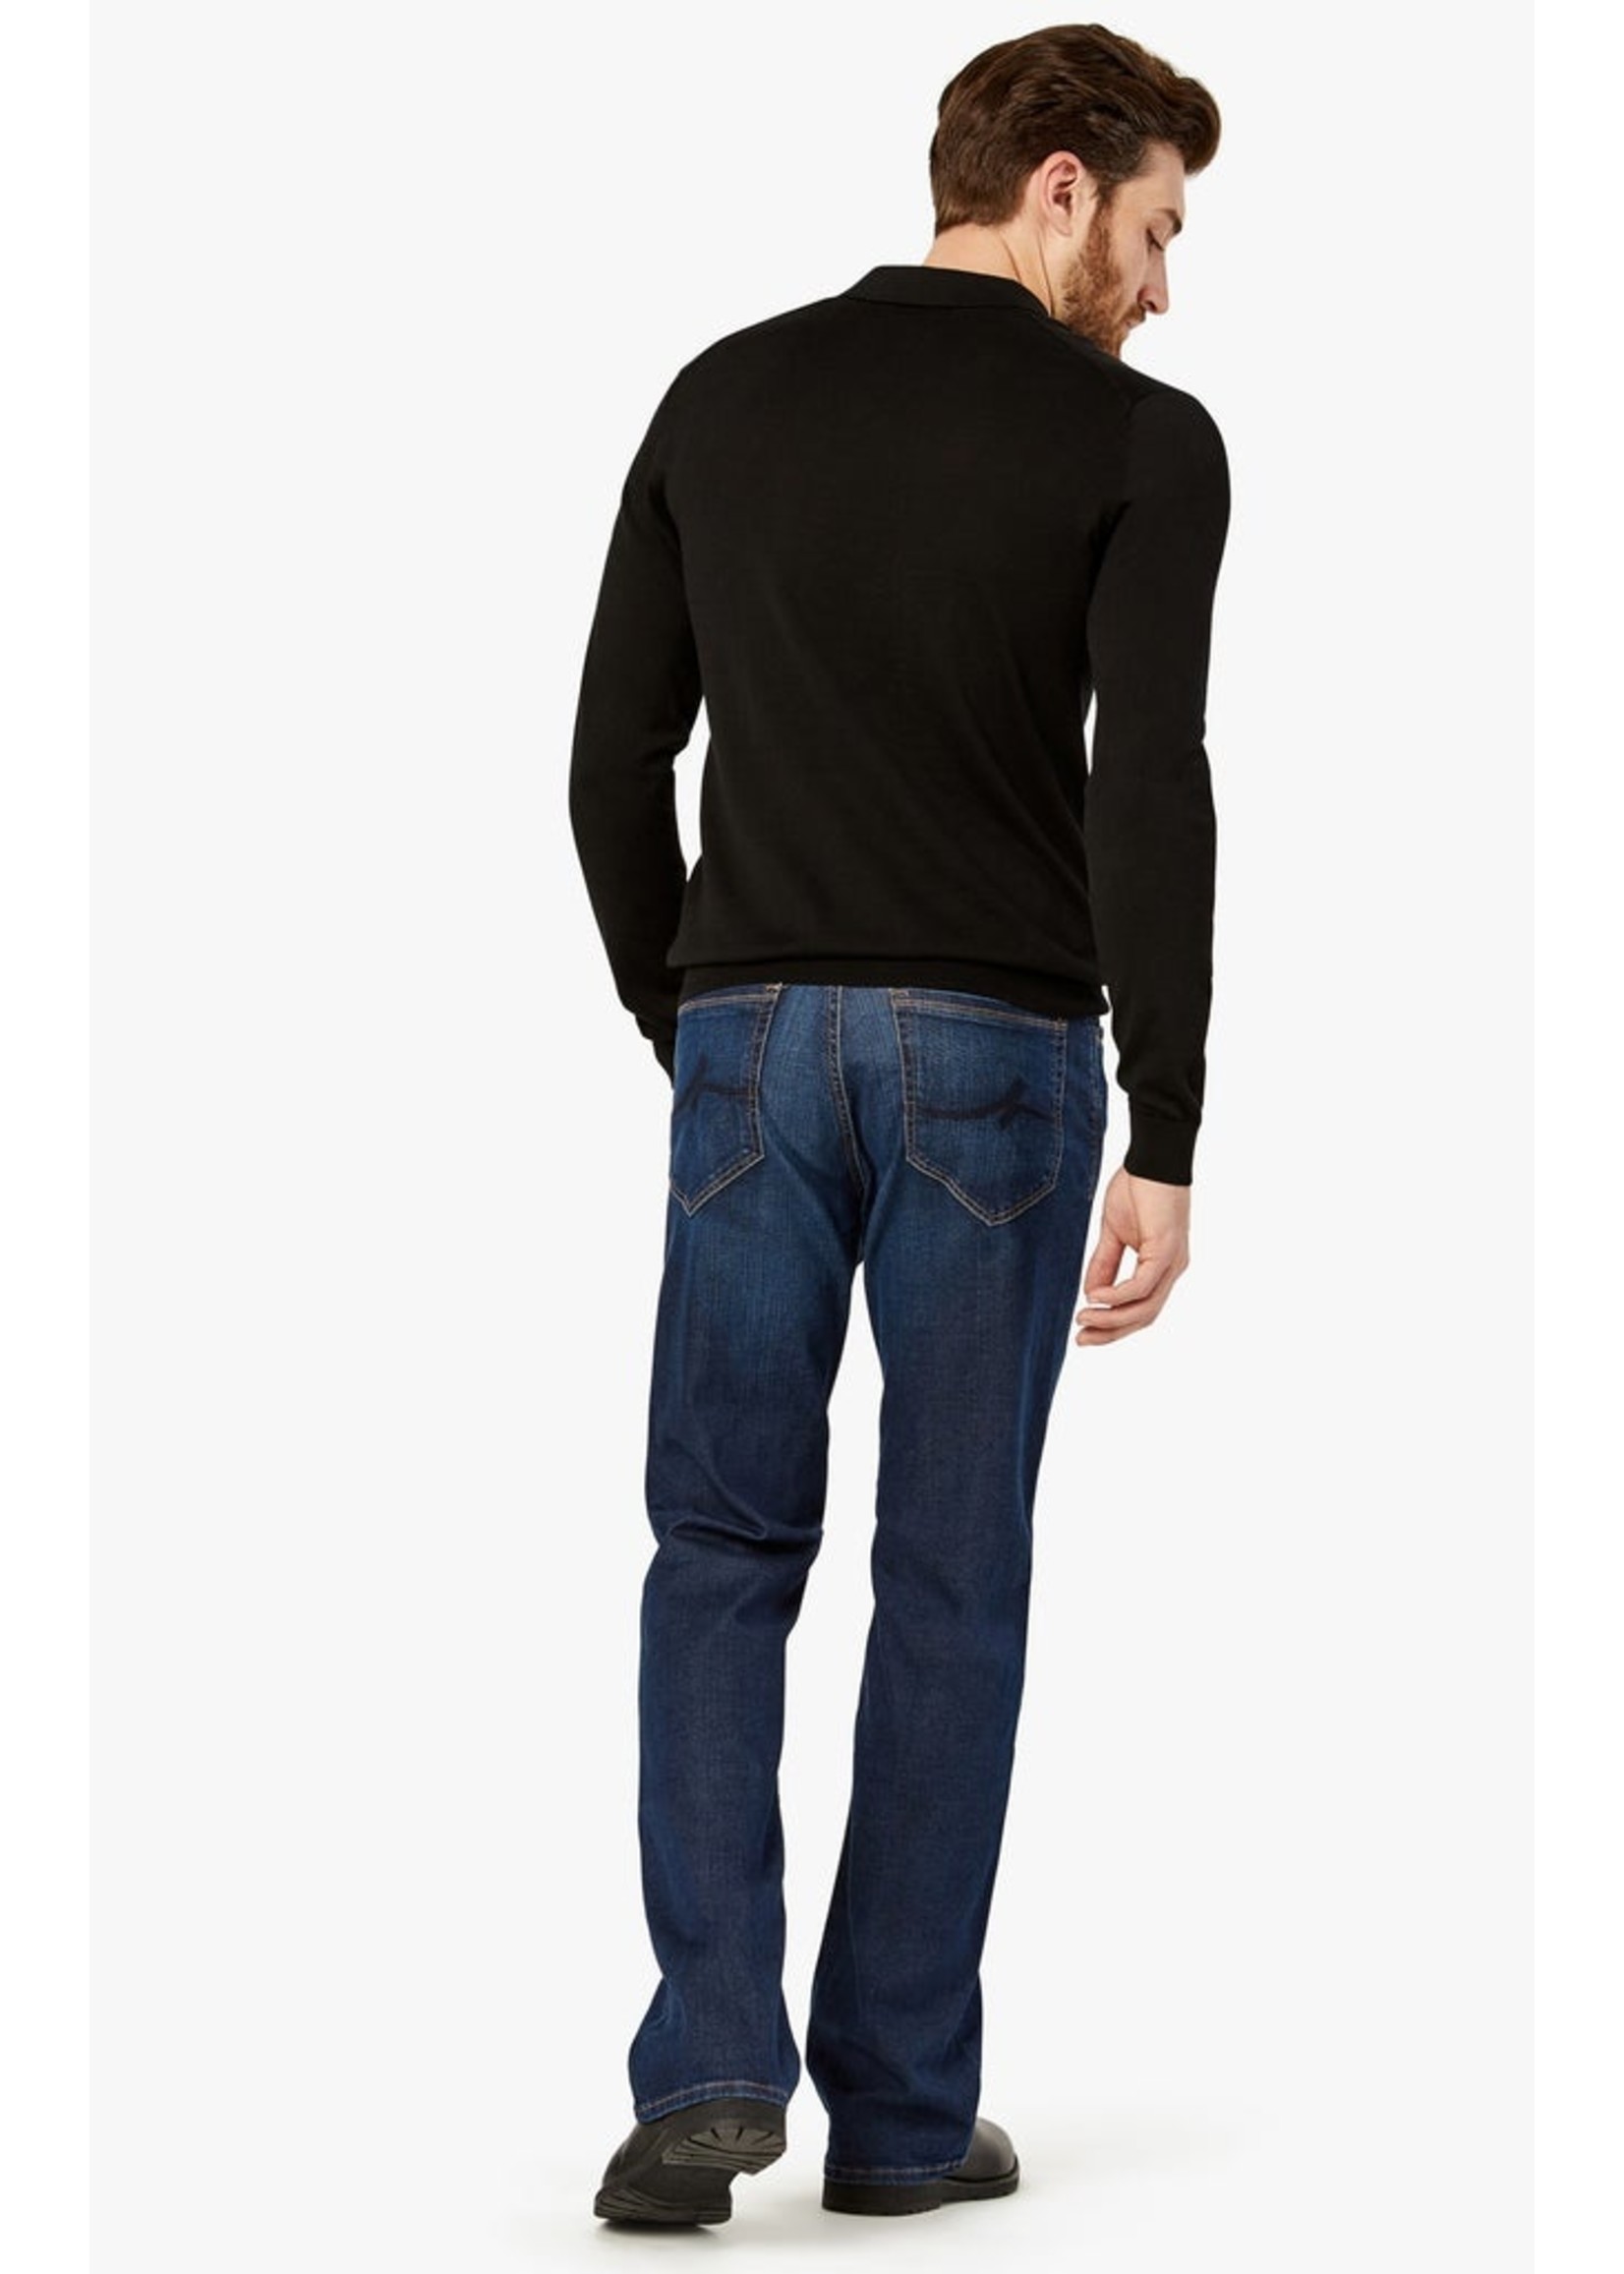 34 HERITAGE 'Charisma' Relaxed Straight Jean in Dark Cashmere